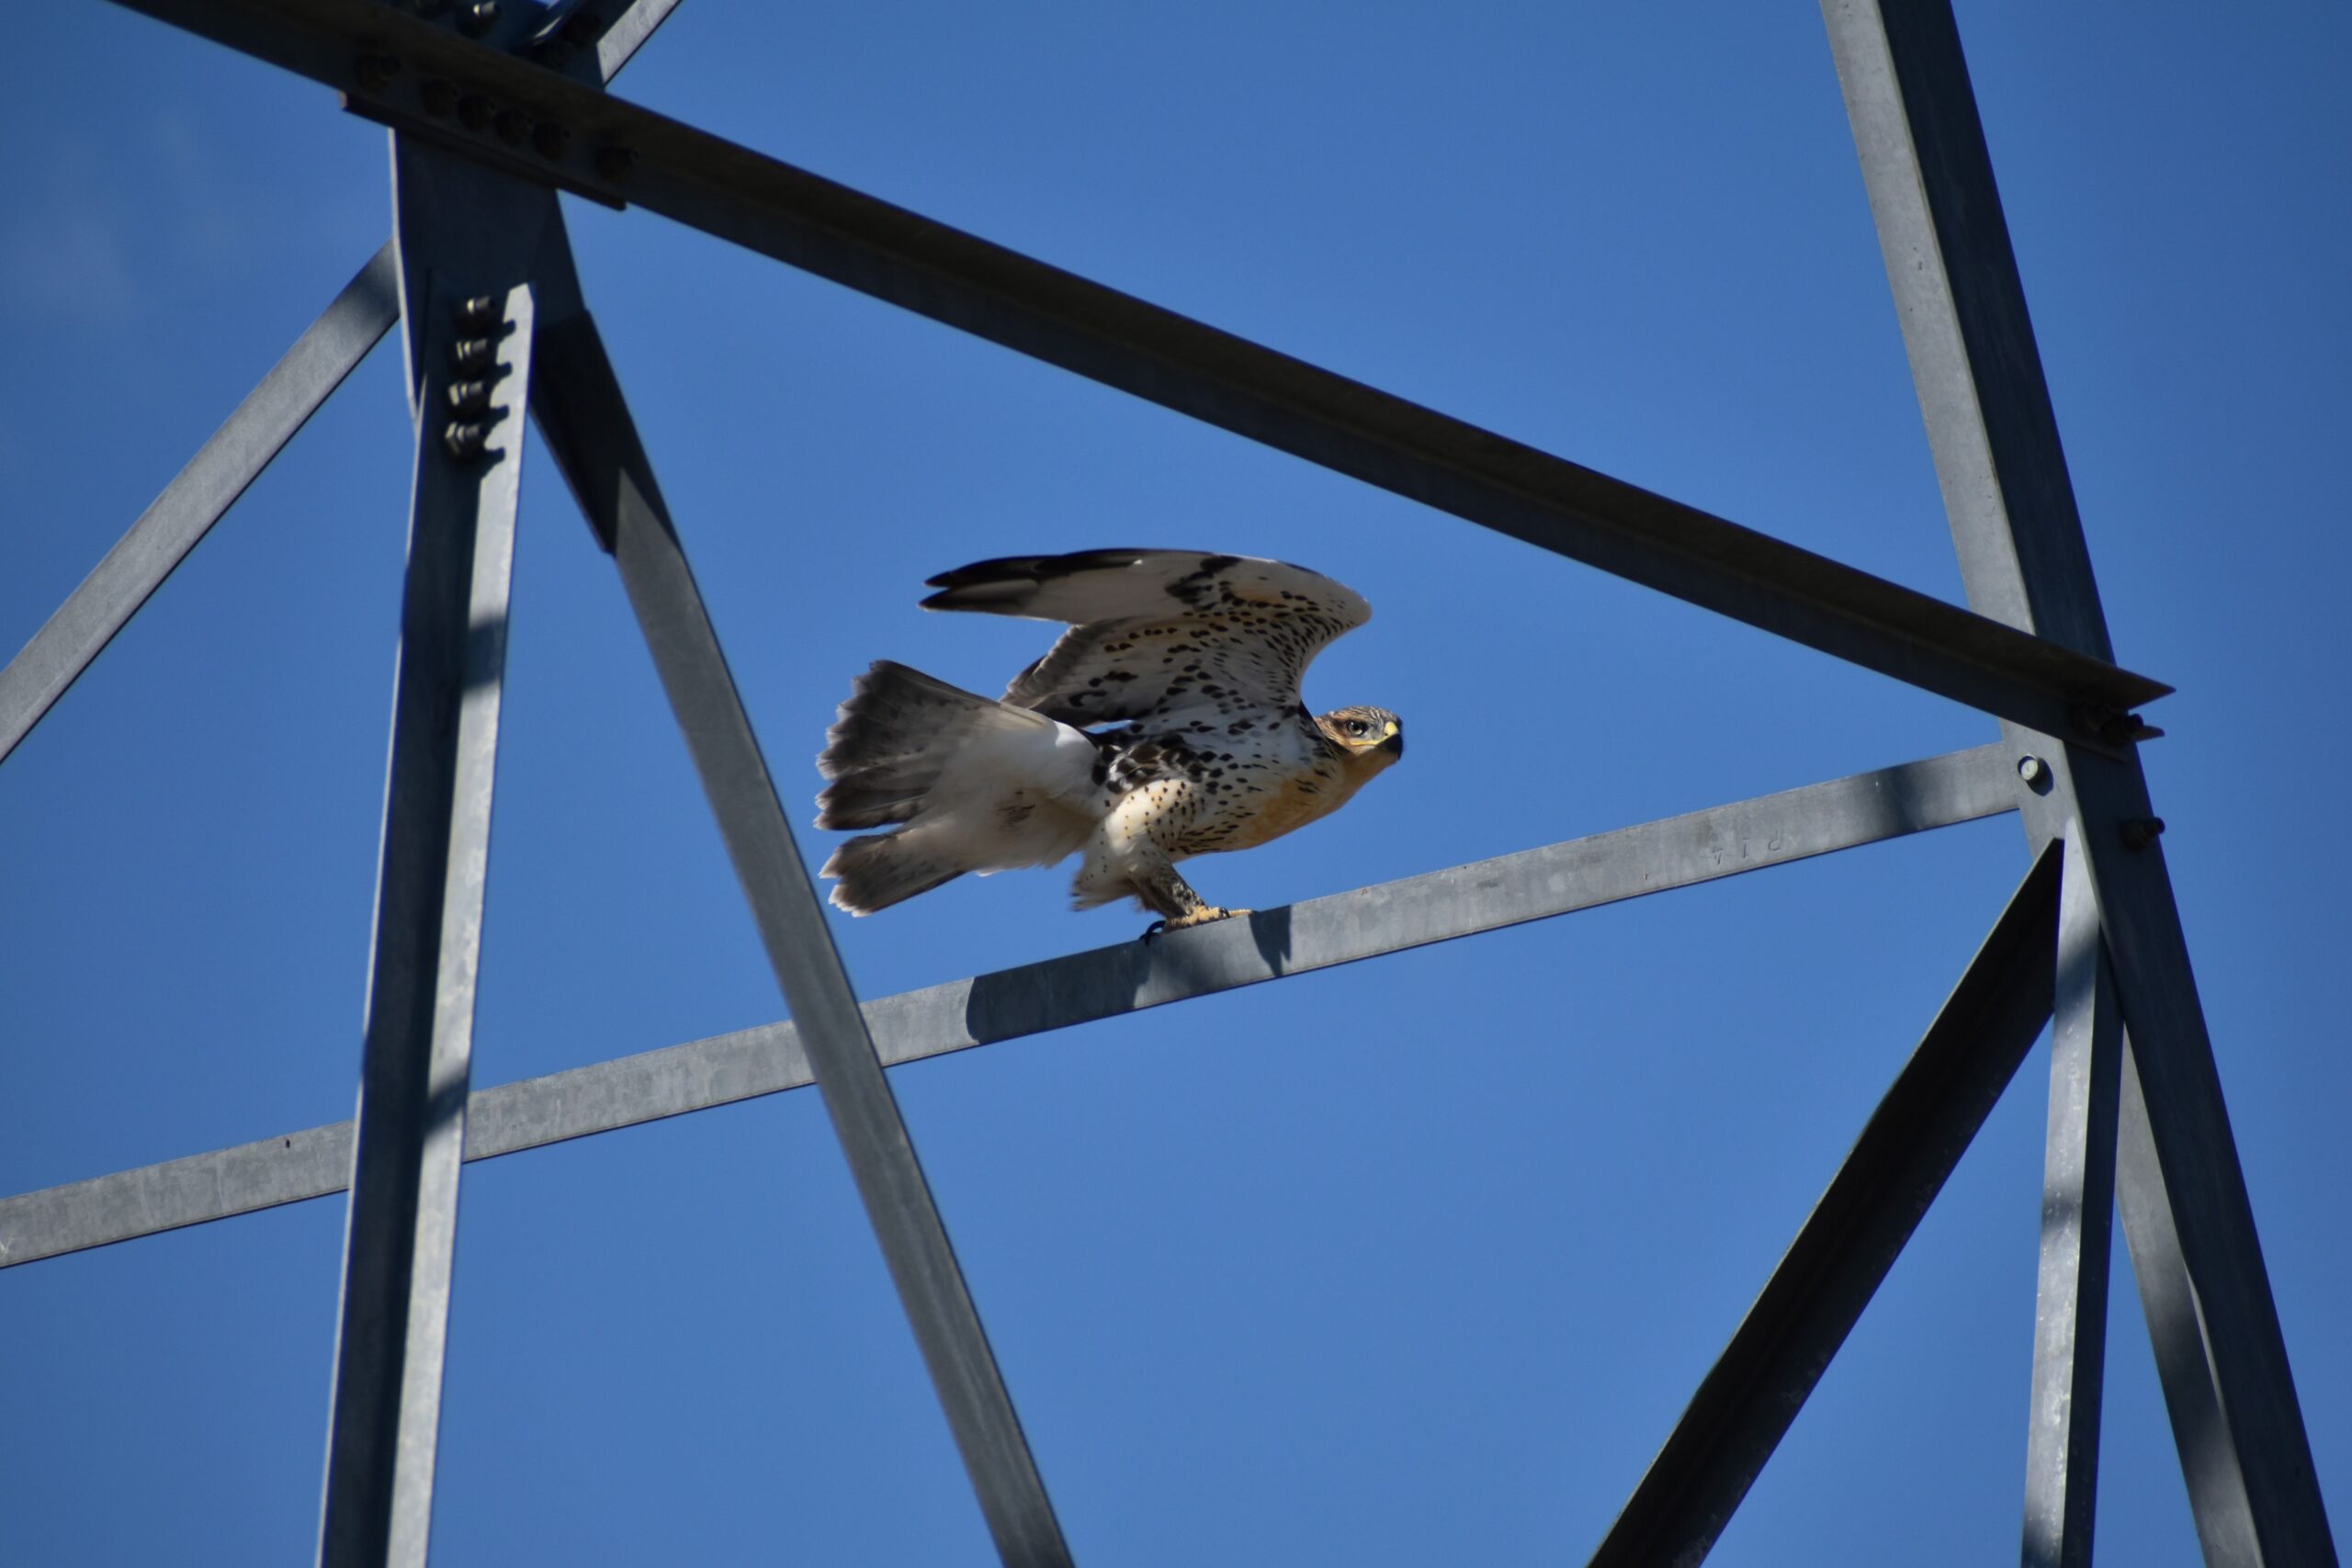 metal transmission tower struts crisscross the image. In the center, a large ferruginous hawk is poised ready to take flight. Its wings are raised over its head, and tail spread. Its legs look ready to spring into the air to take off.